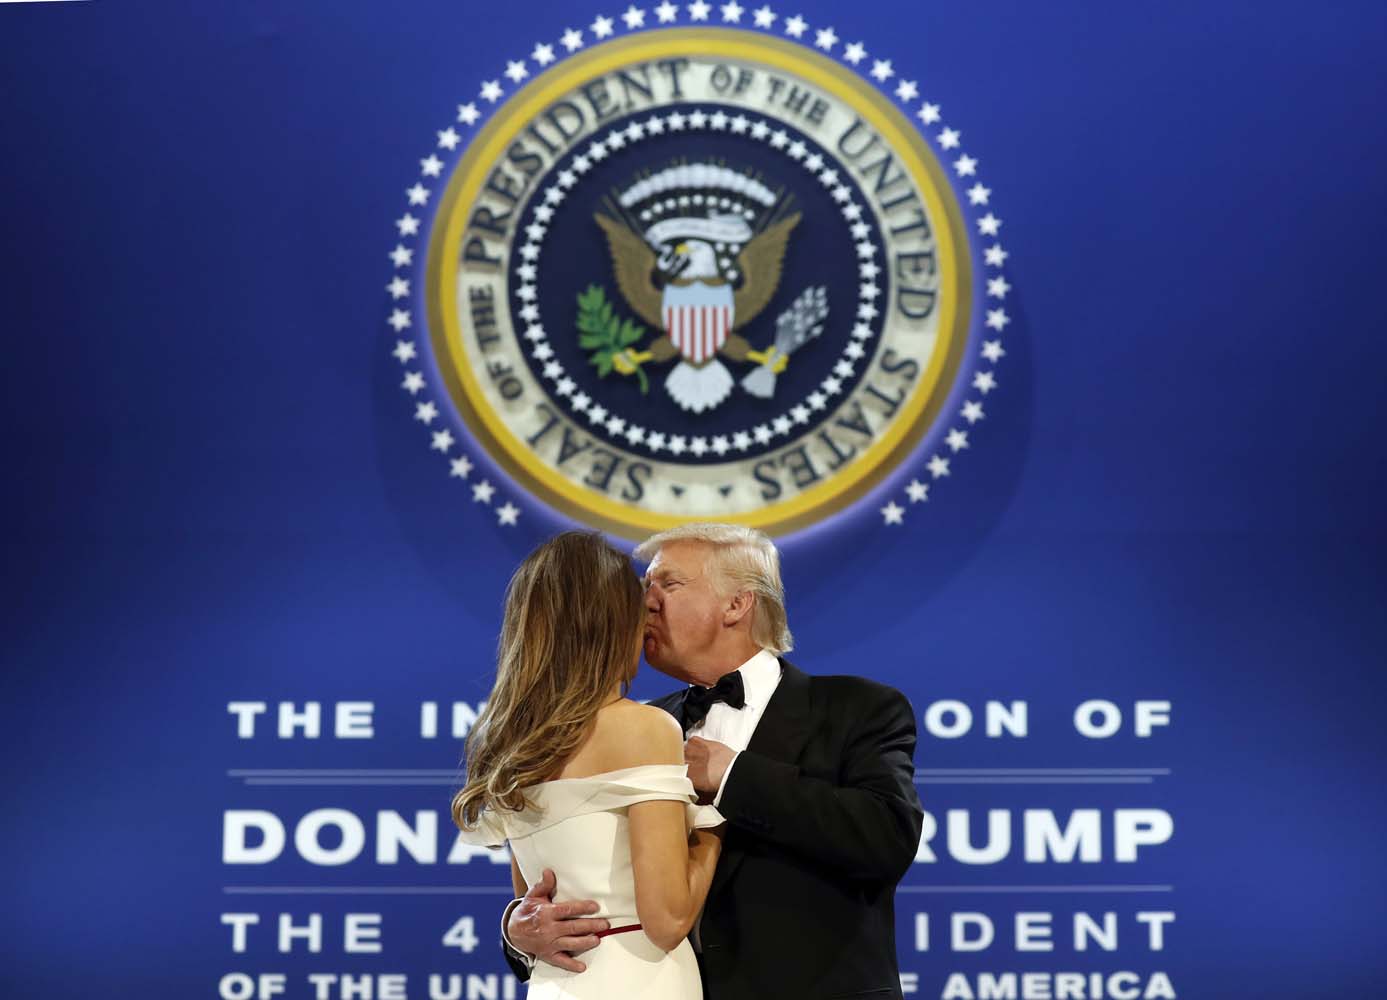 President Donald Trump kisses first lady Melania Trump as they dance at the The Salute To Our Armed Services Inaugural Ball in Washington, Friday, Jan. 20, 2017. (AP Photo/Alex Brandon)